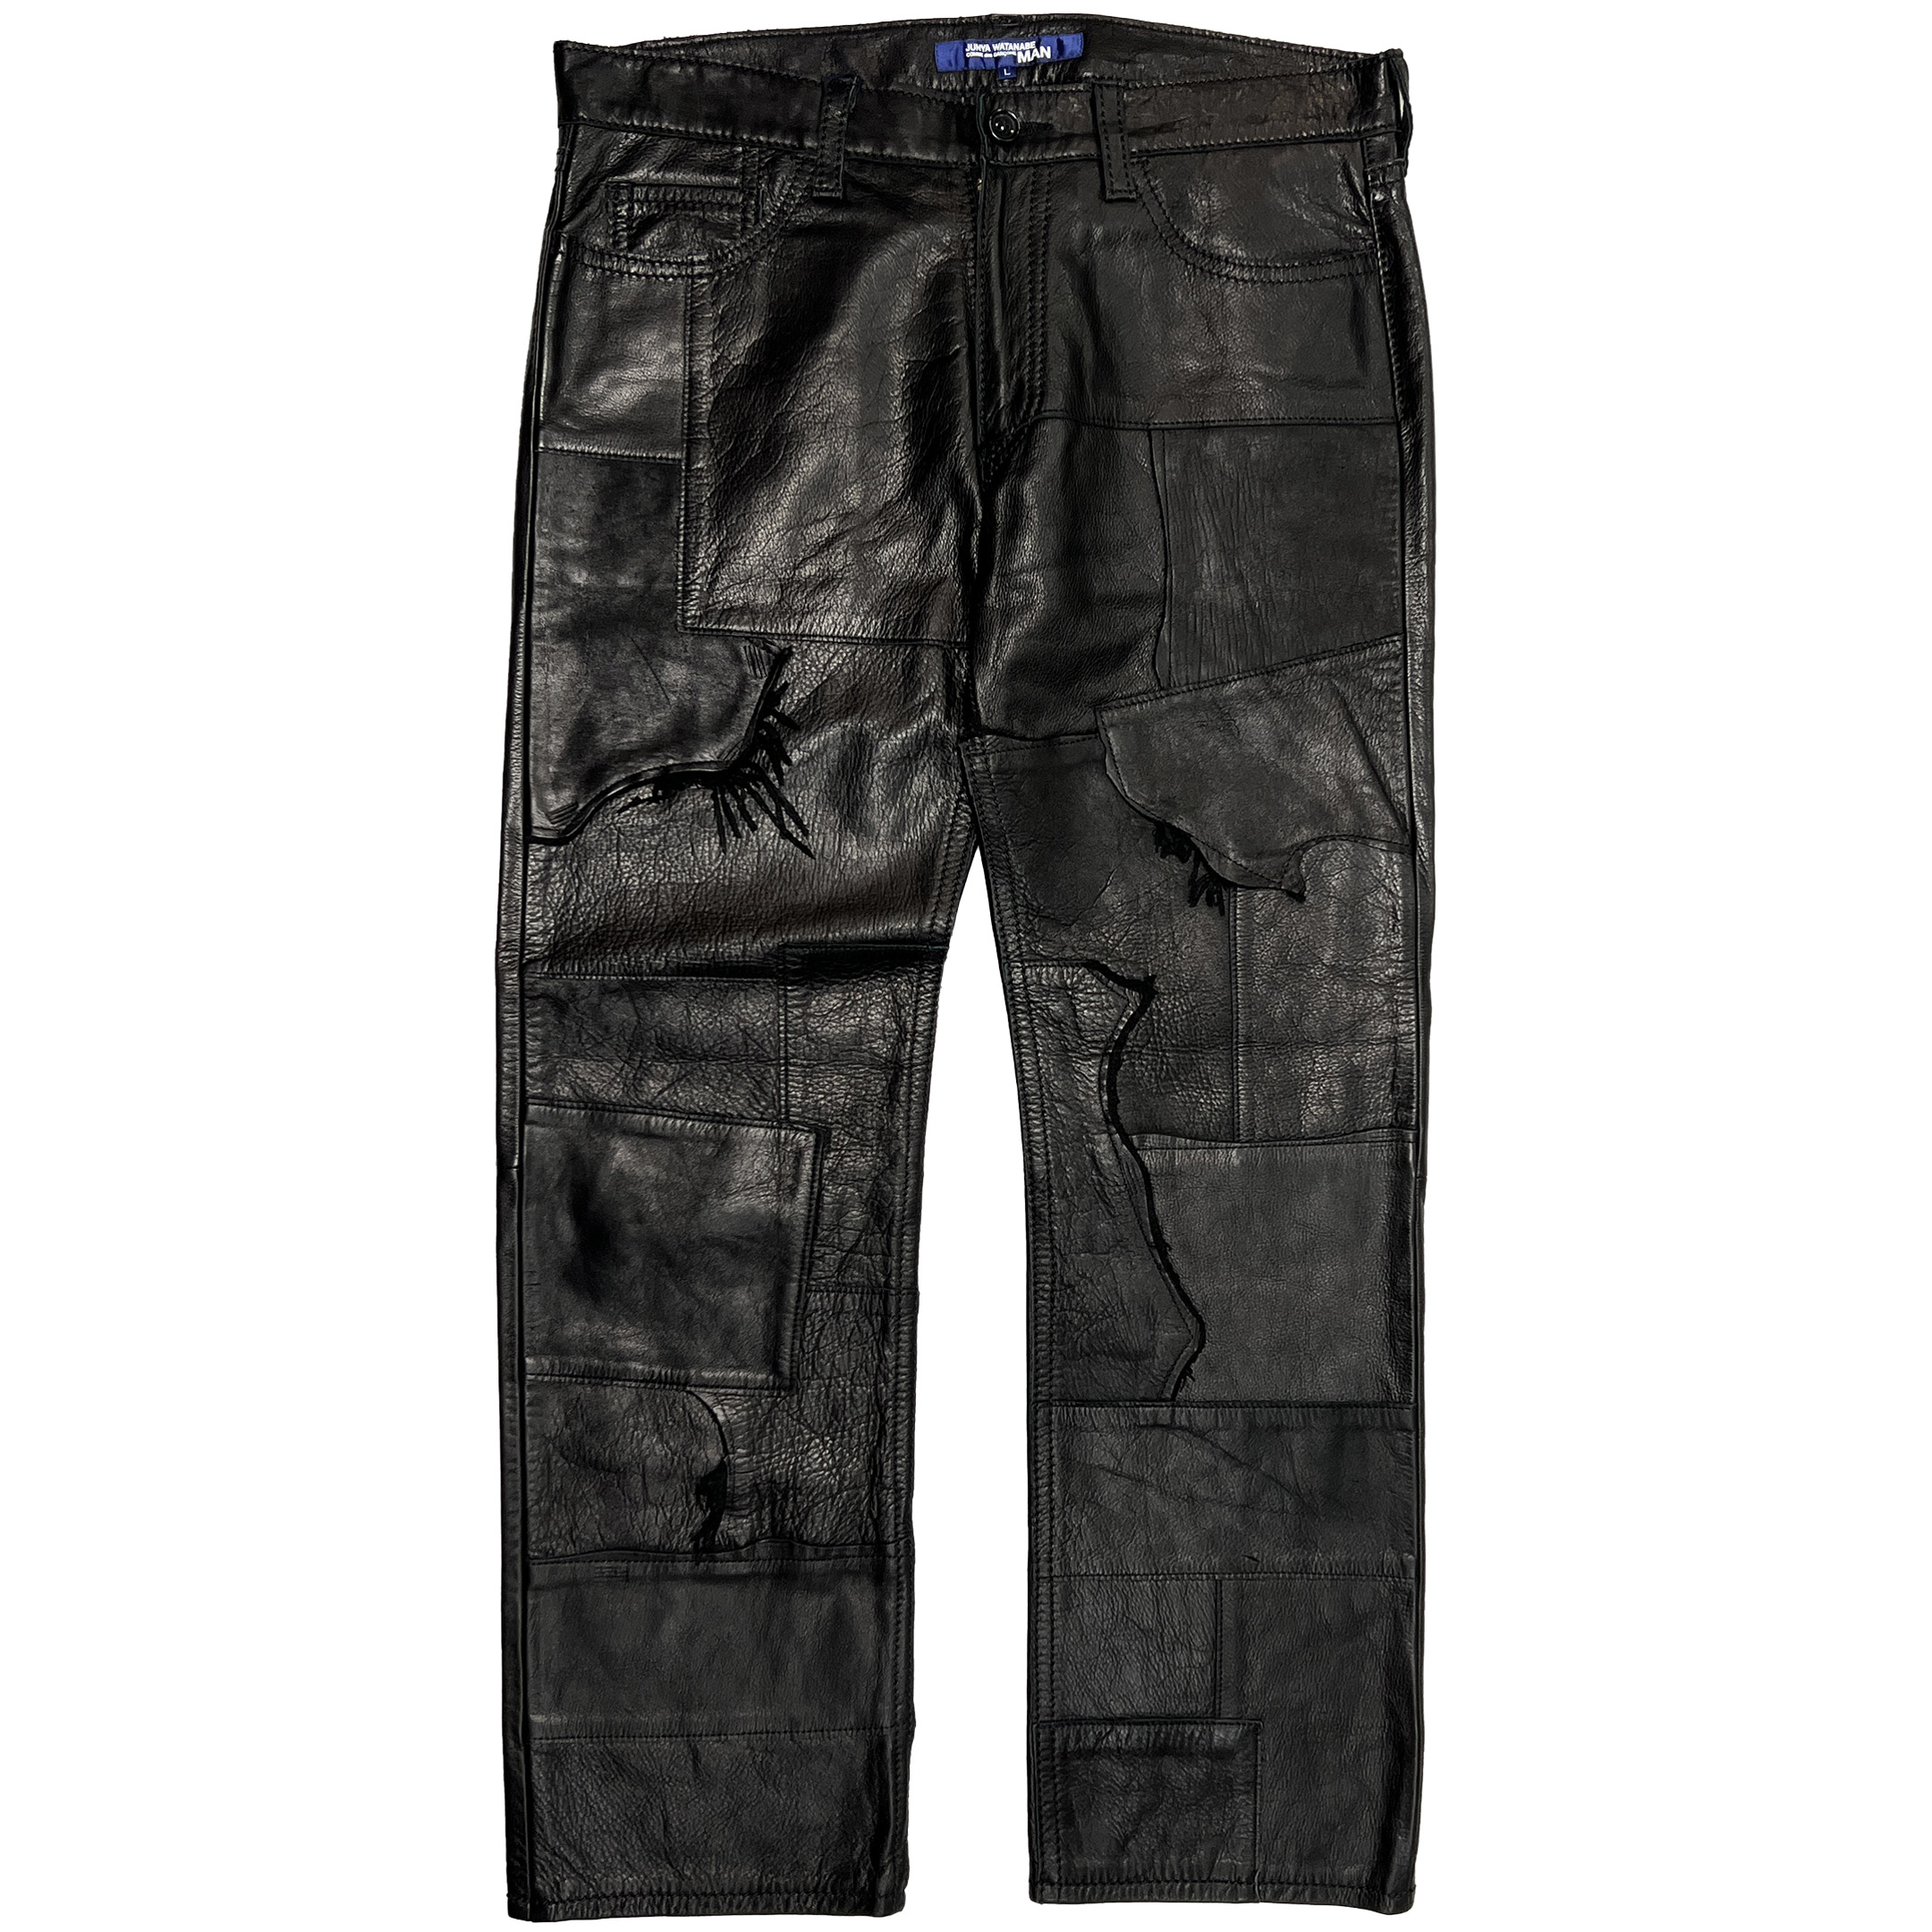 Junya Watanabe Man, S/S 2005 Leather Patchwork Trousers - La 